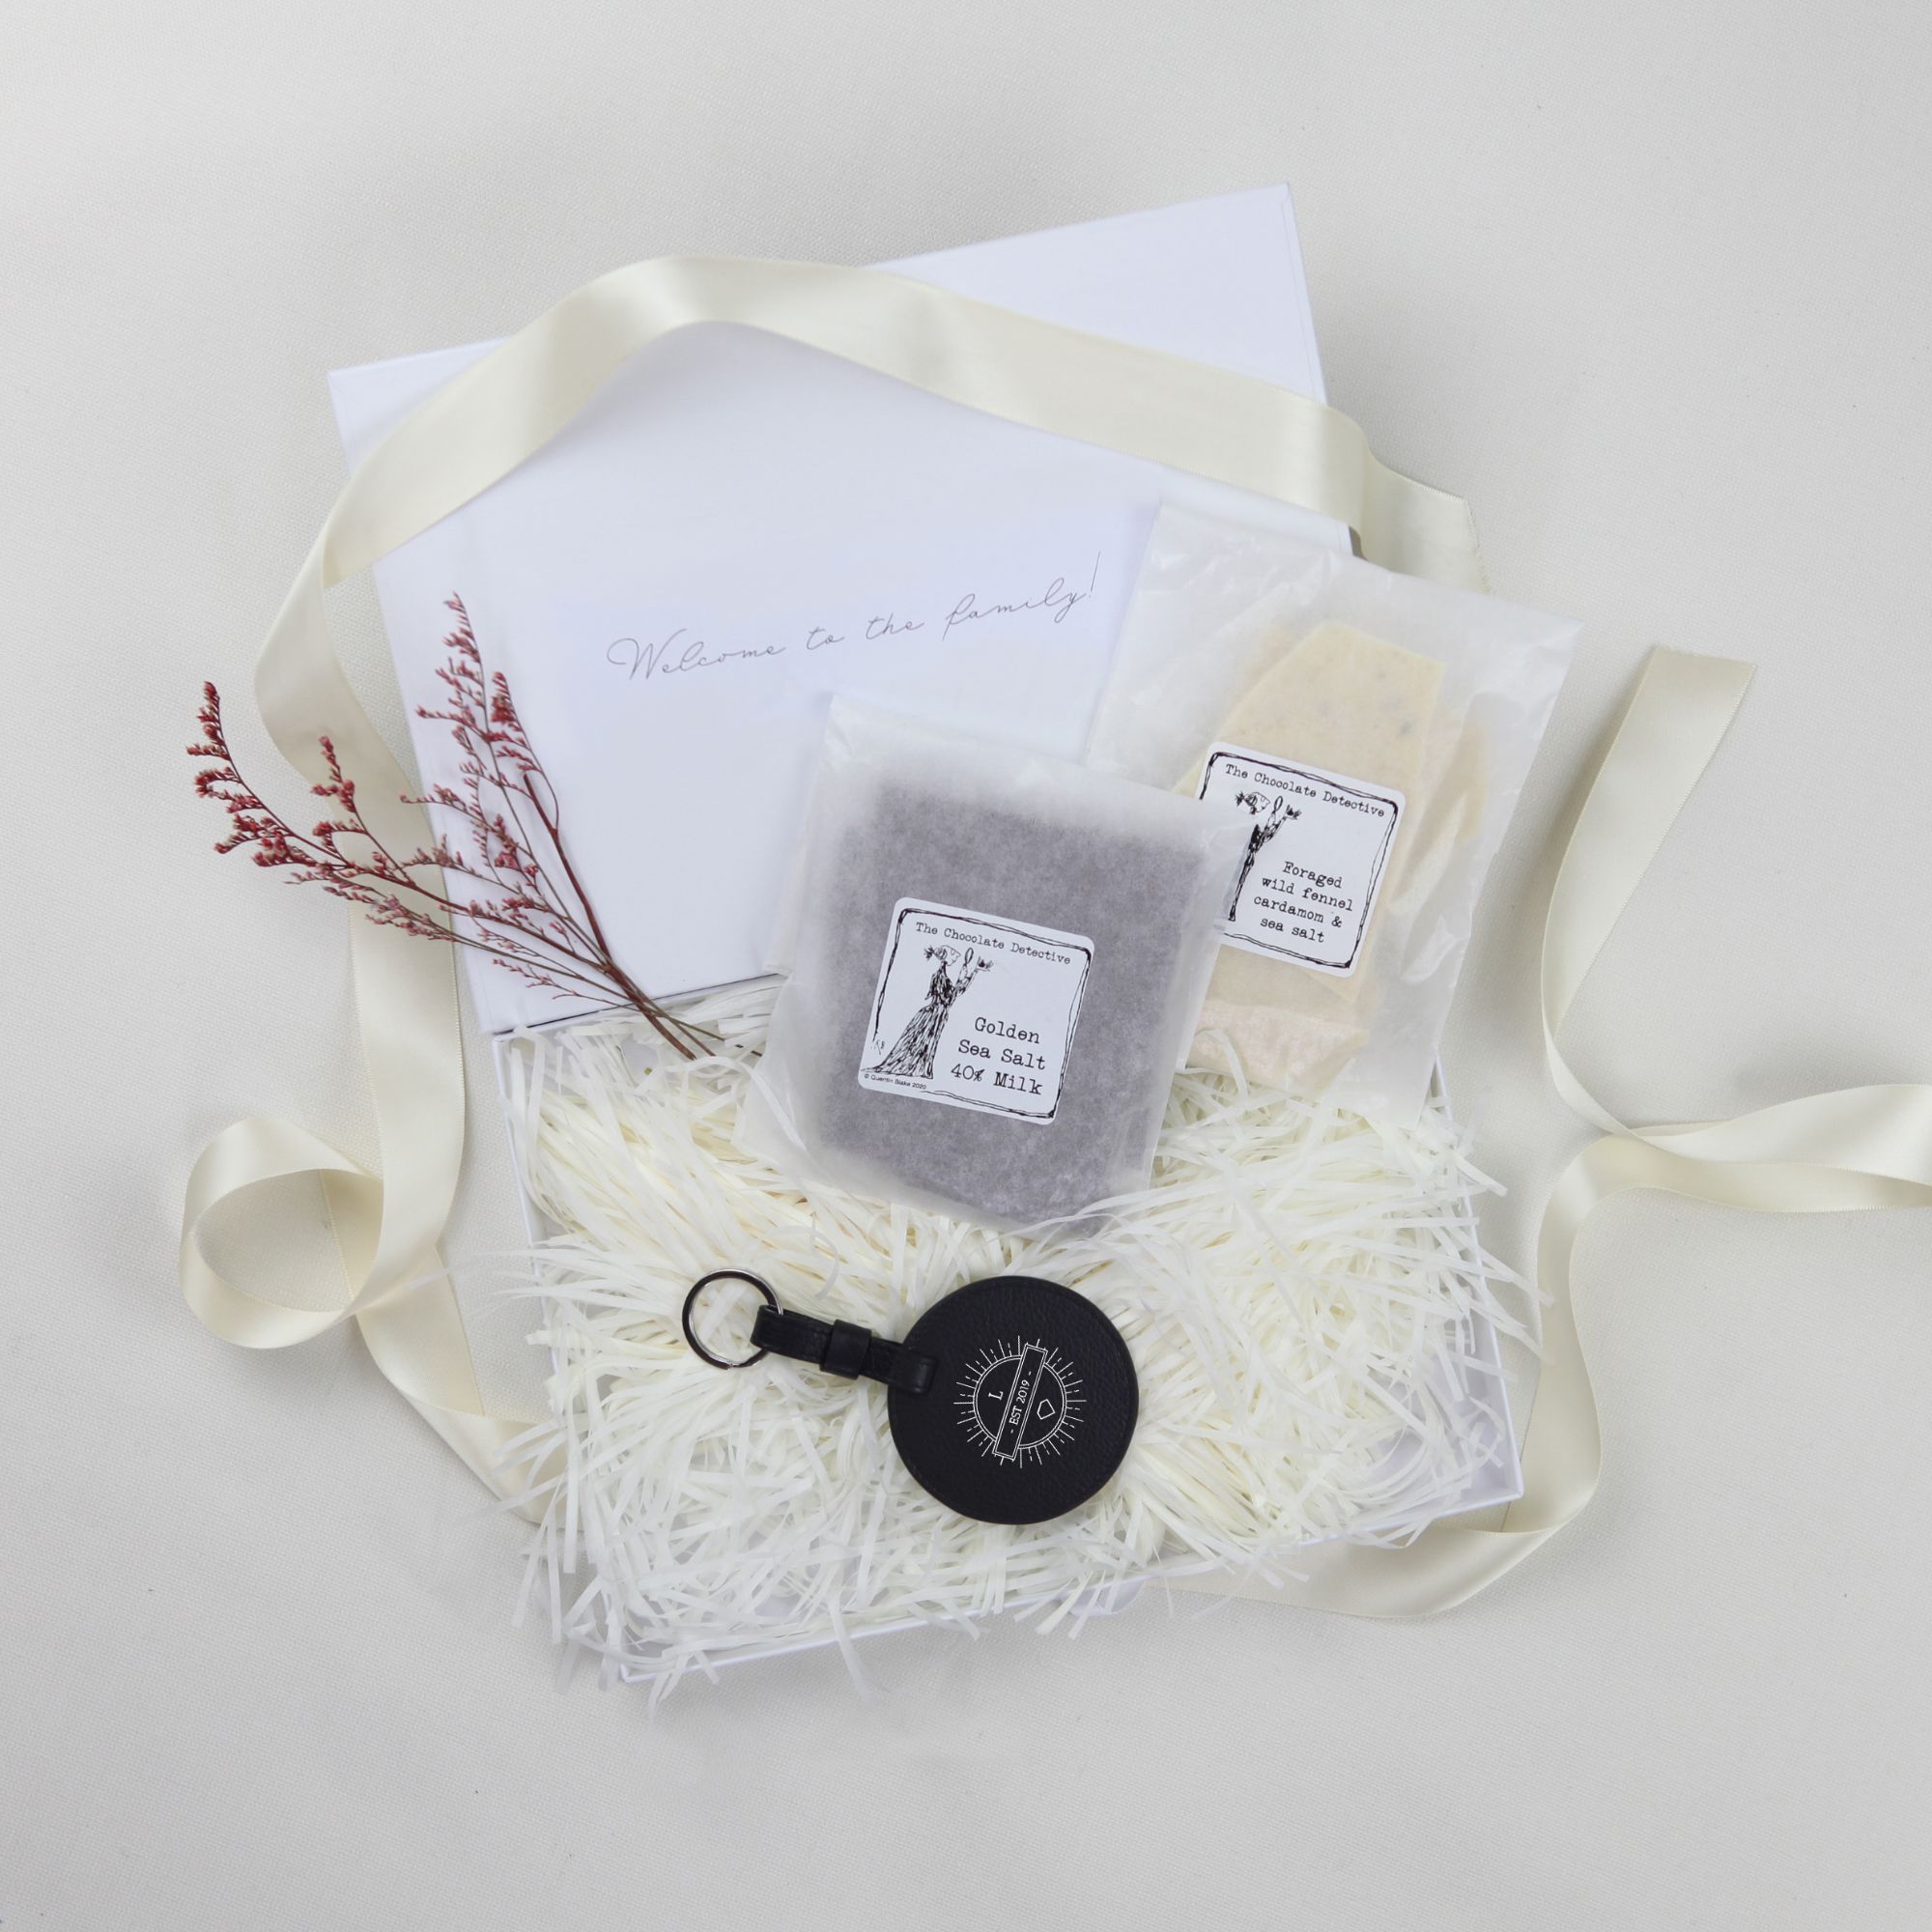 Appreciation gift box with branded leather round keyring and milk, white, dark chocolates